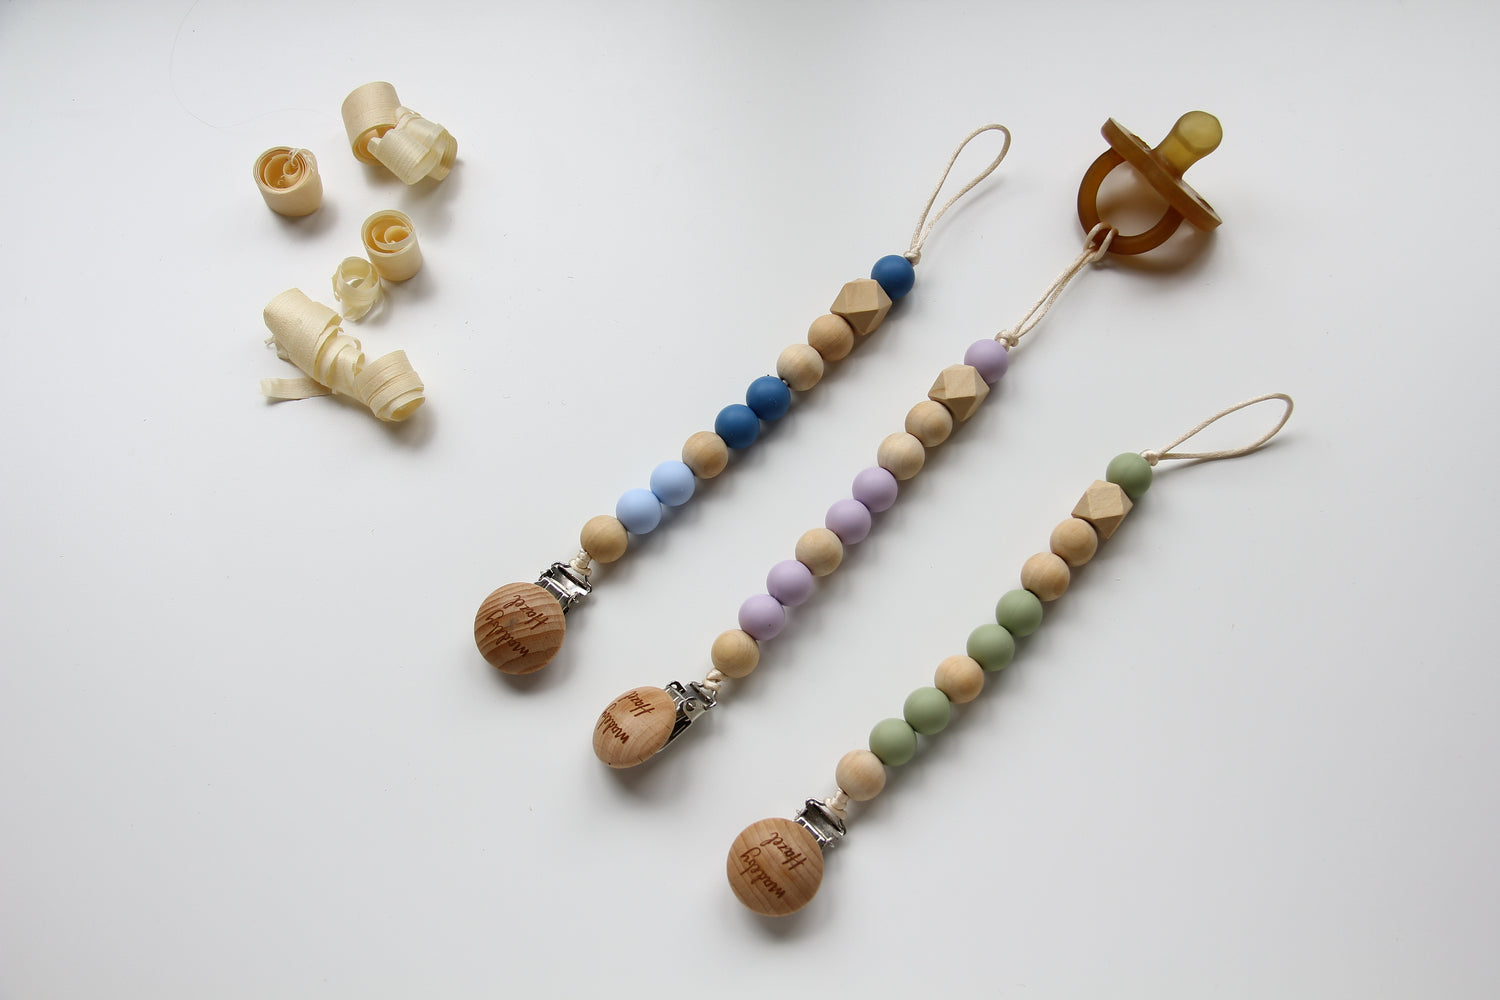 Chic Dummy holder in Natural wood & BPA Free silicone from madebyHazel- Blues, Lilac or Light Green!